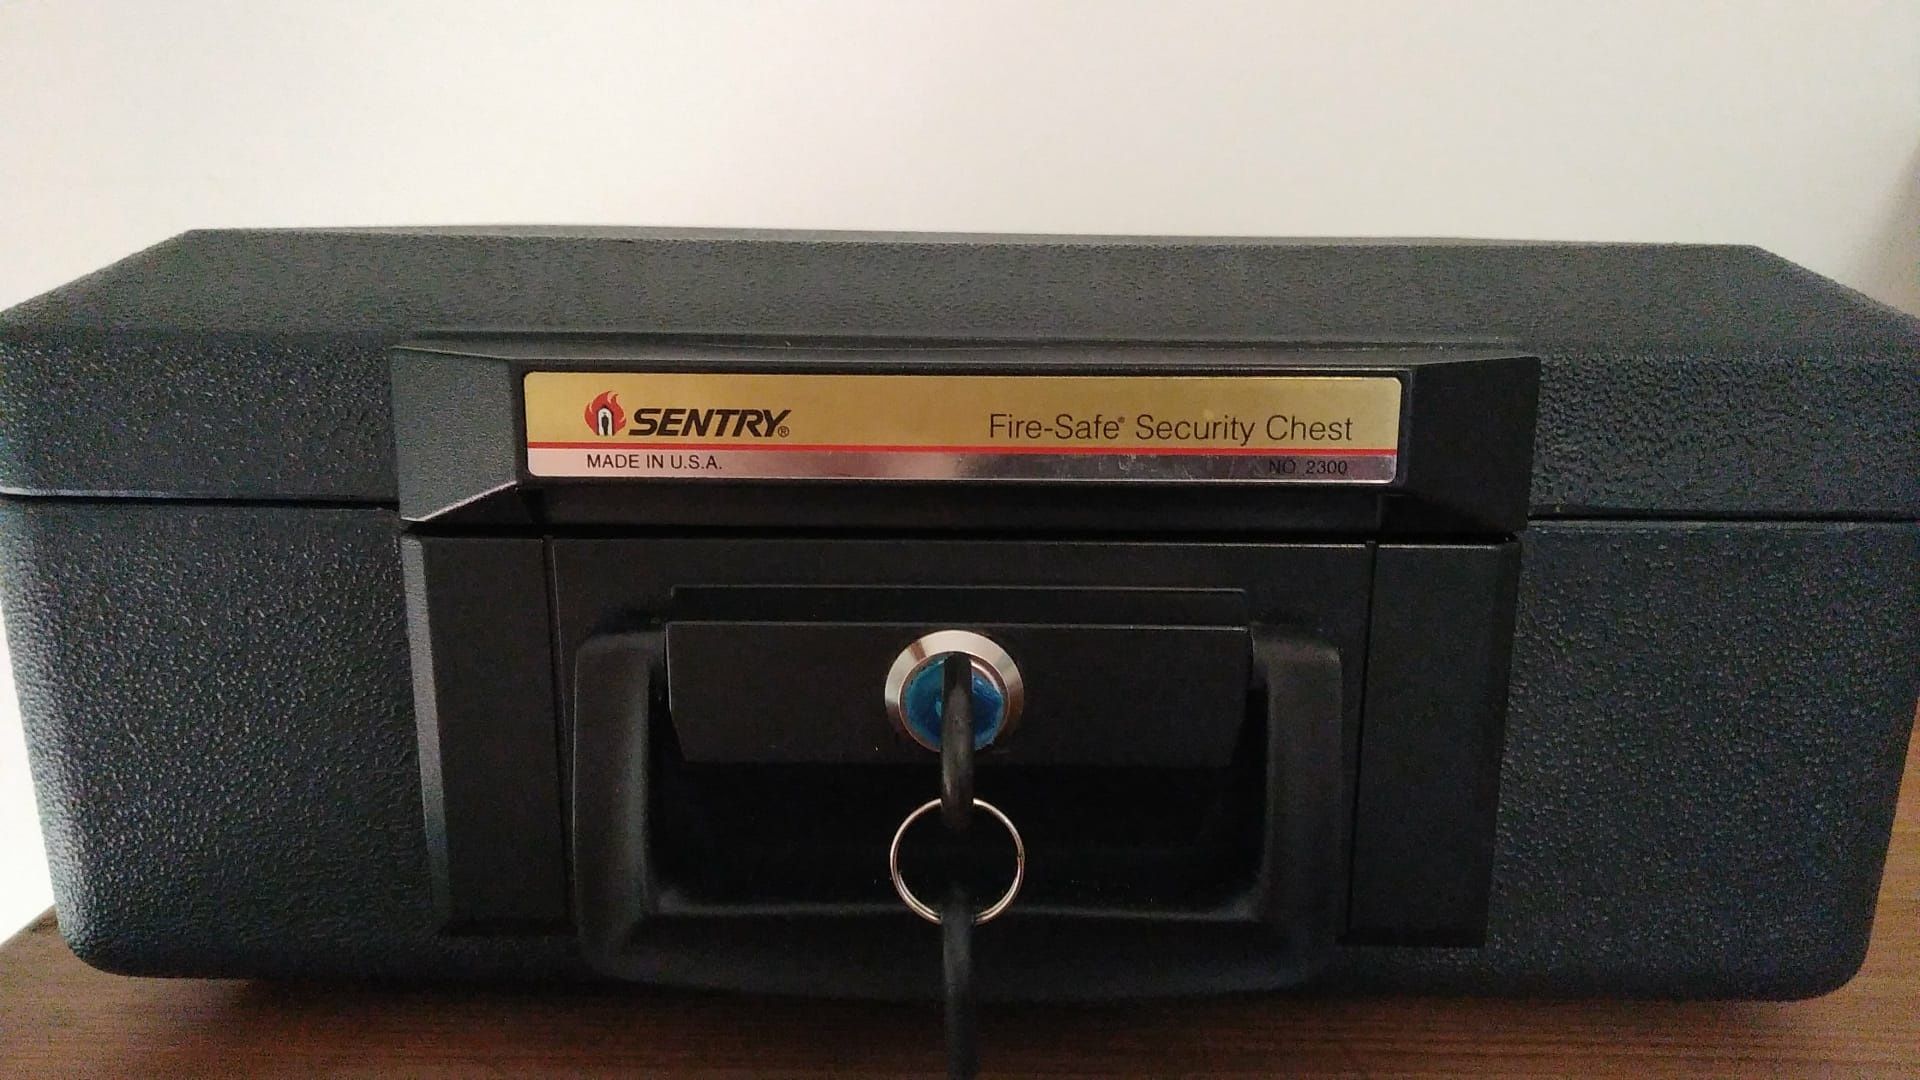 Sentry fire-safe security chest